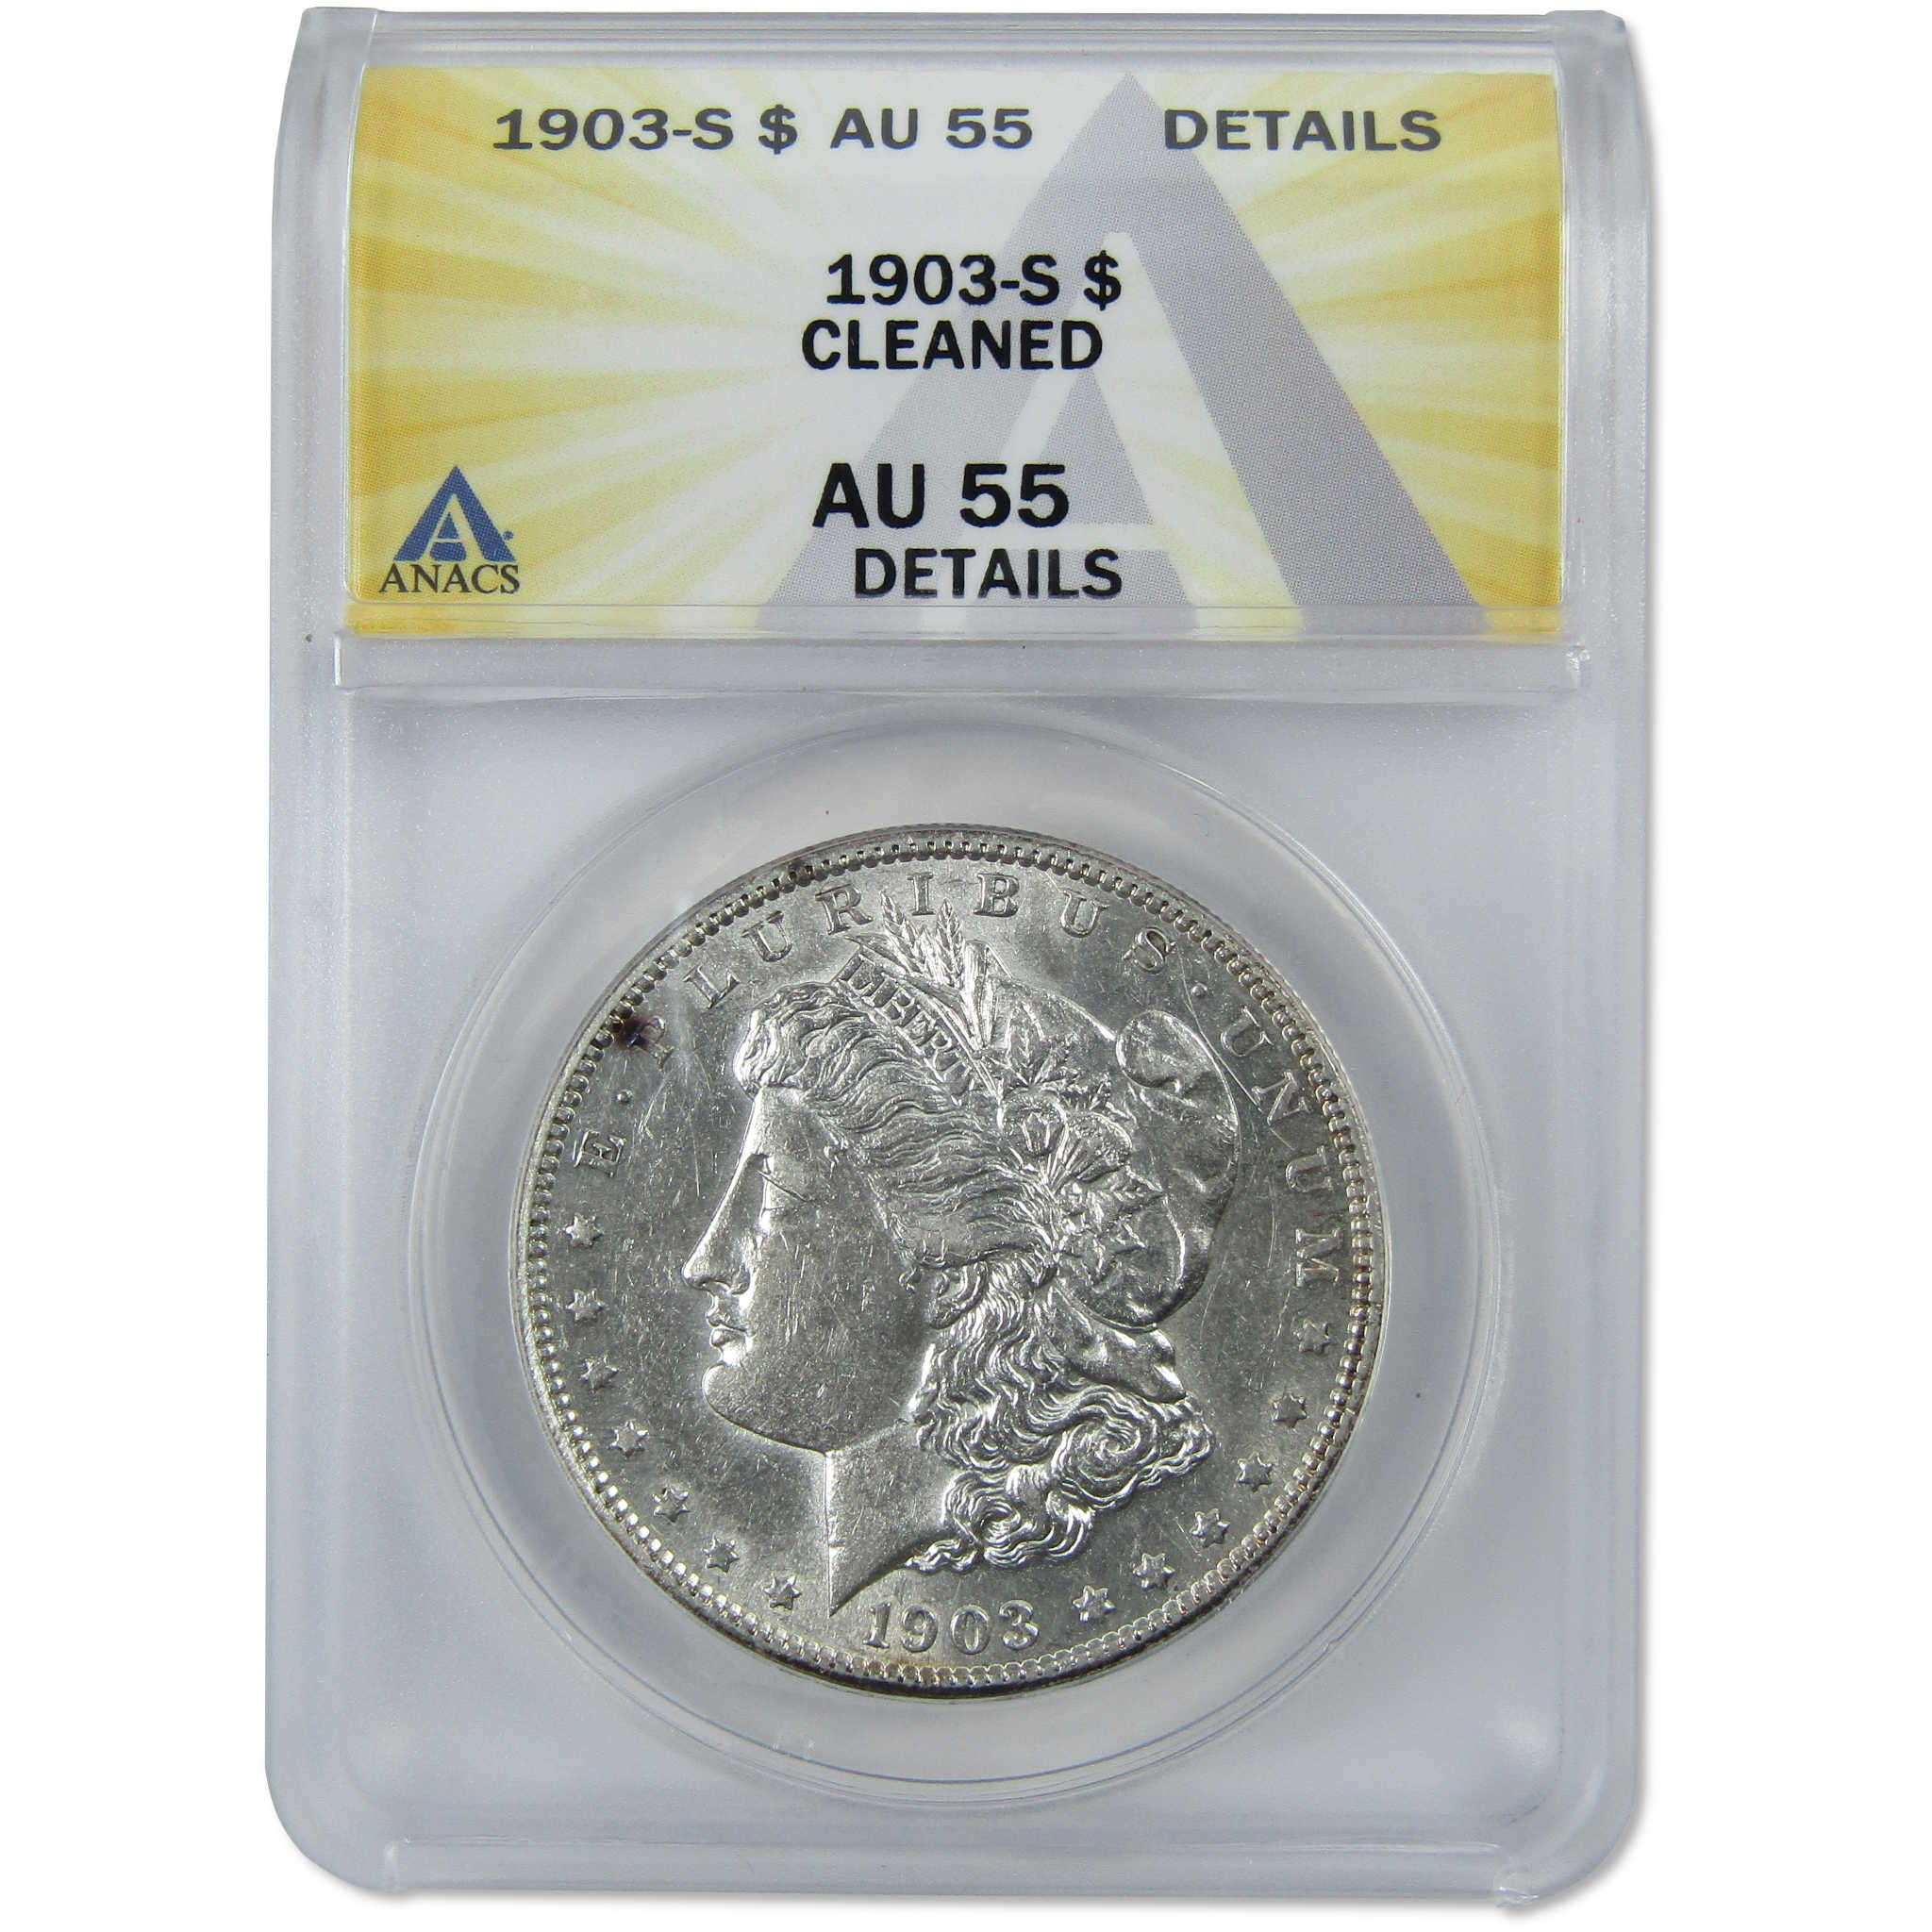 1903 S Morgan Dollar AU 55 Details ANACS Silver $1 Coin SKU:CPC2720 - Morgan coin - Morgan silver dollar - Morgan silver dollar for sale - Profile Coins &amp; Collectibles